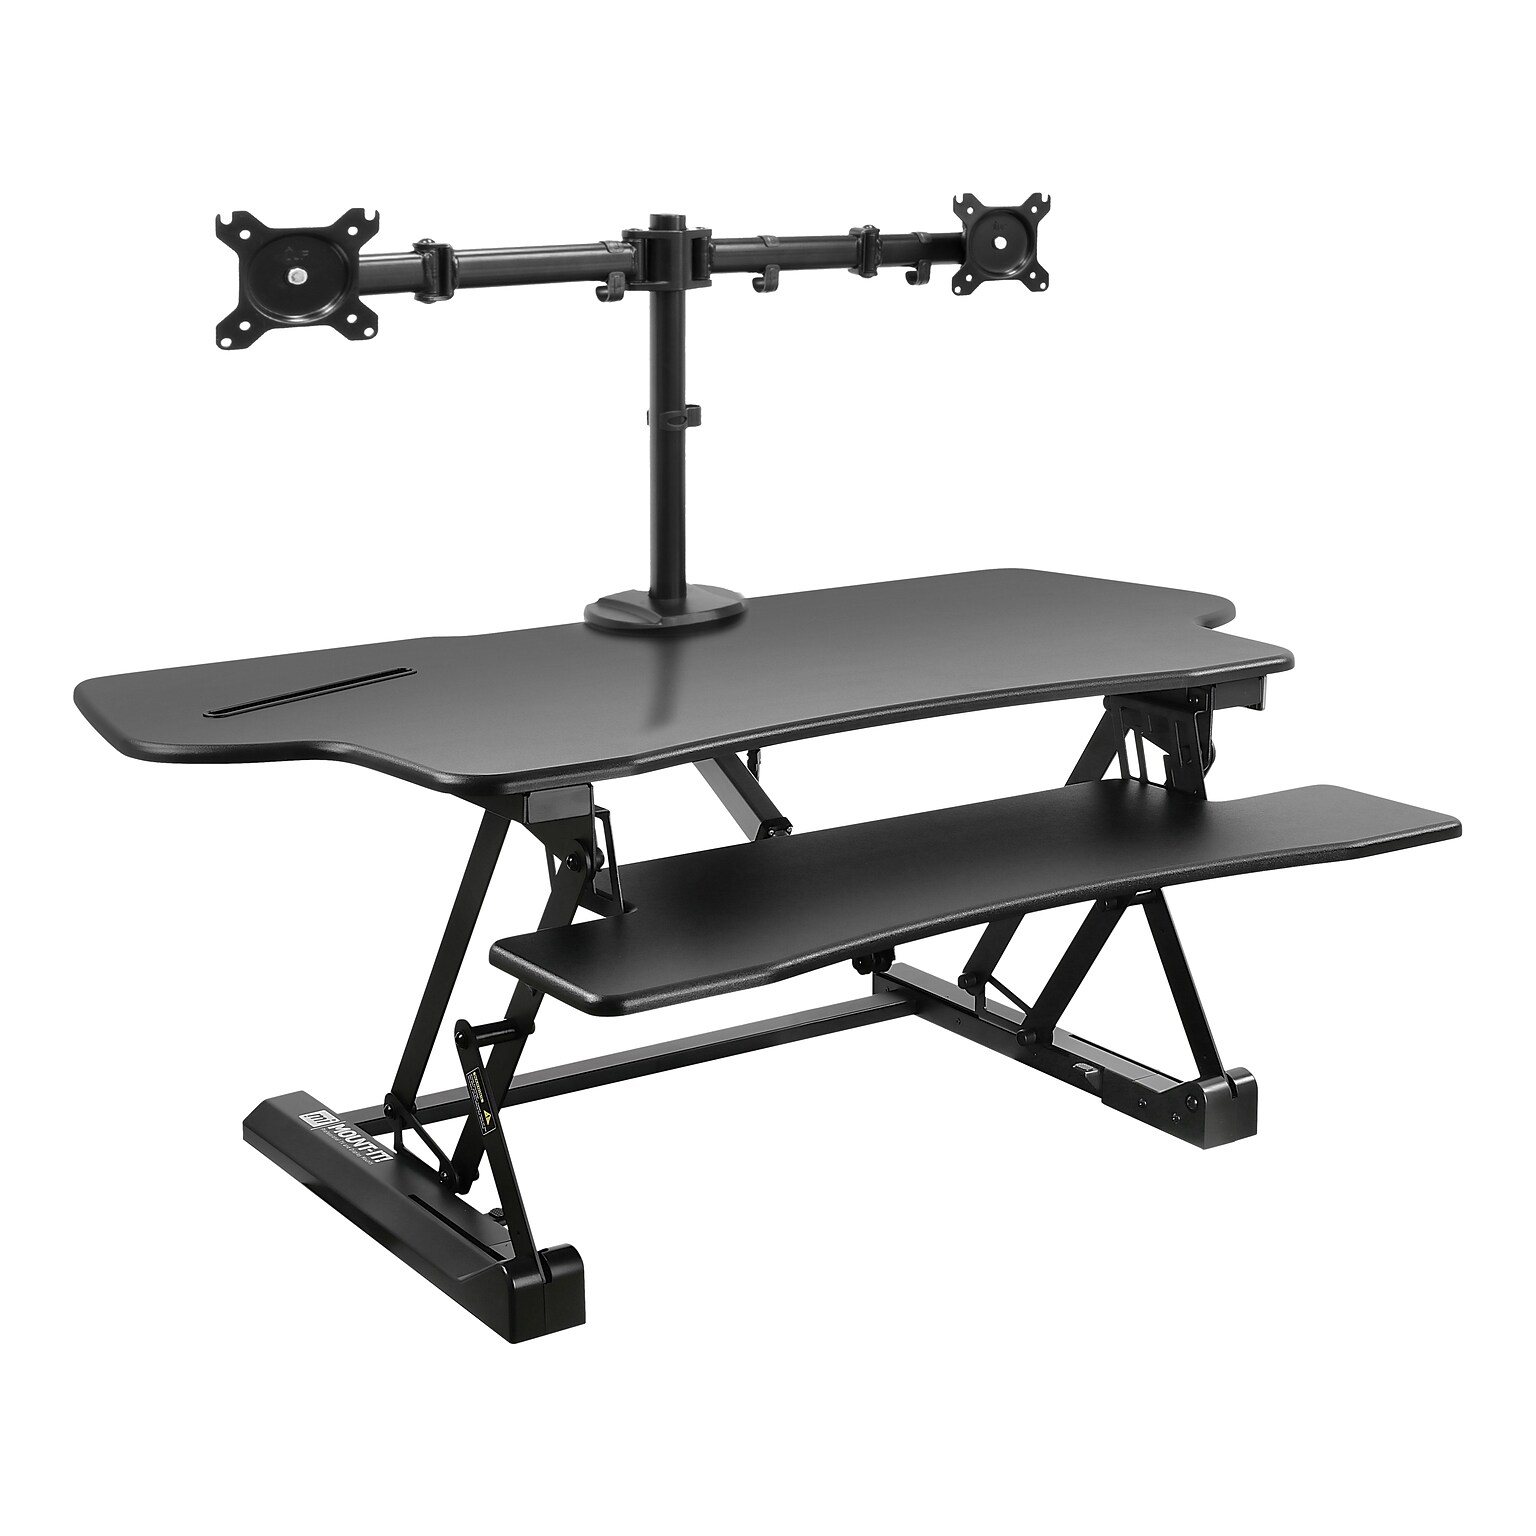 Mount-It! 47W Electric Adjustable Standing Desk Converter with Dual Monitor Mount and USB Charging Port, Black (MI-8054)